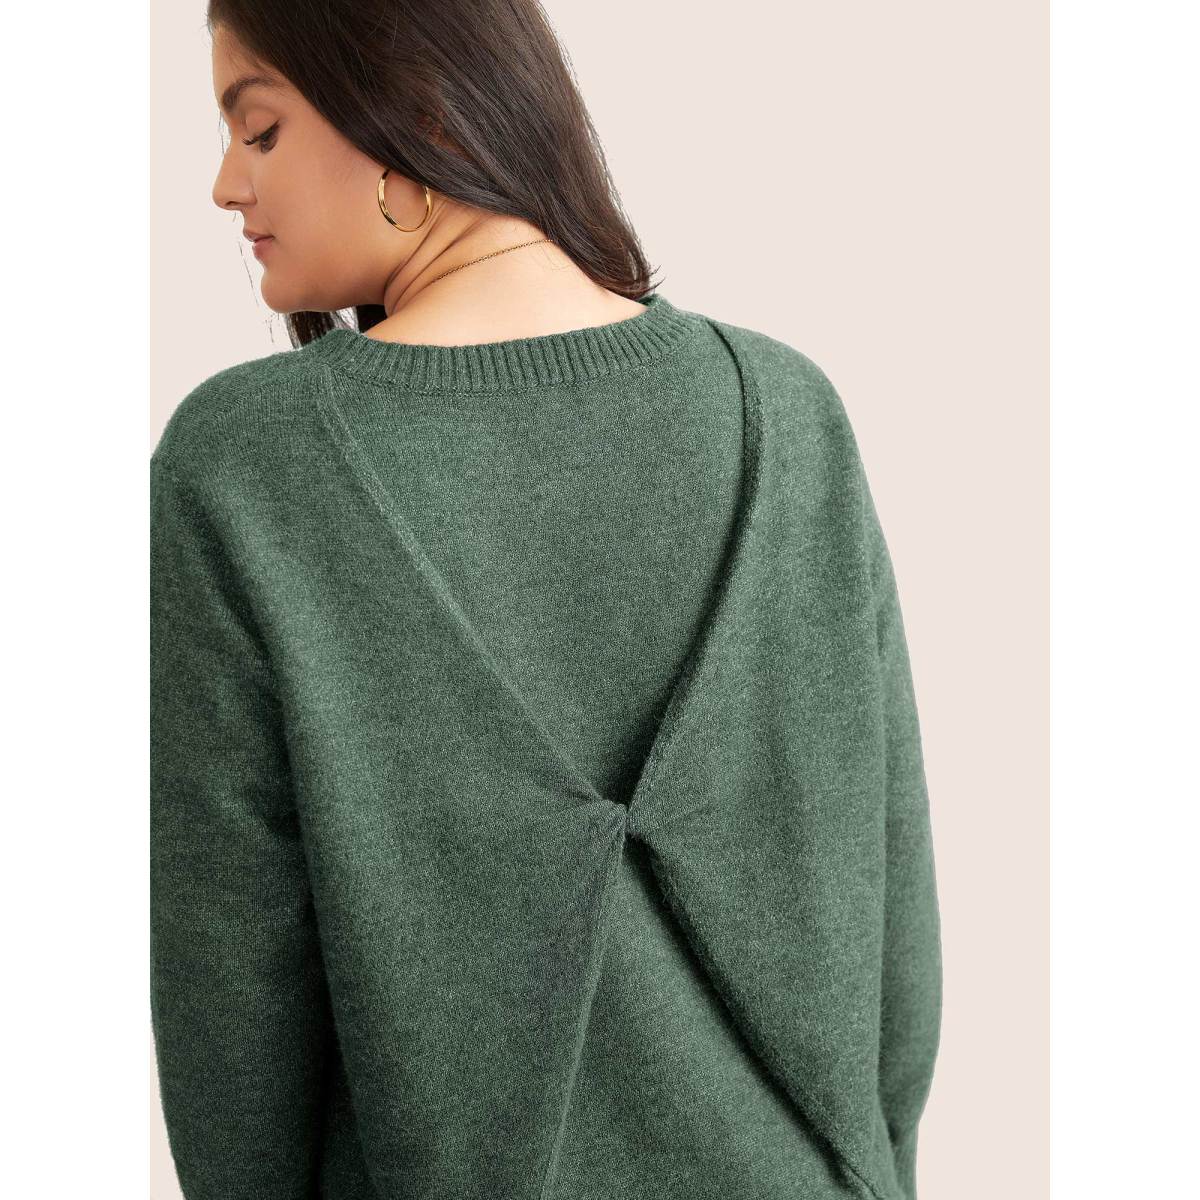 

Plus Size Supersoft Essentials Solid Heather Twist Back Pullover Green Women Casual Long Sleeve Round Neck Everyday Pullovers BloomChic